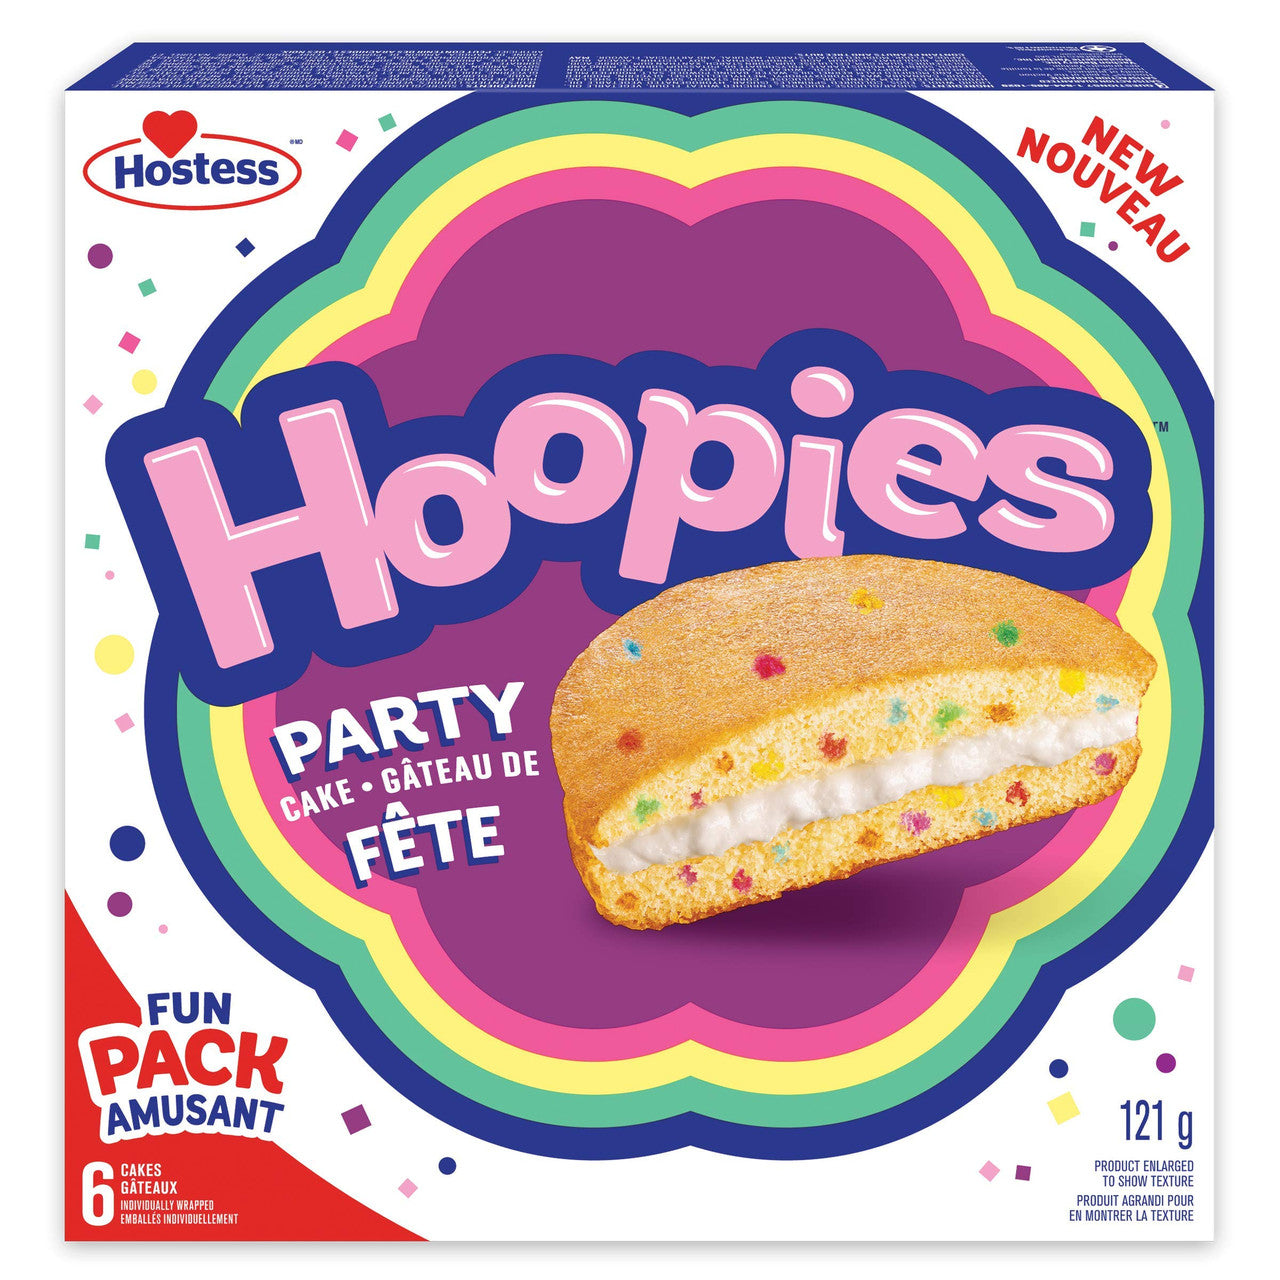 Hostess Hoopies Party Cakes, Birthday-Cake Flavoured, 121g/4.3 oz.,(Individually Wrapped) {Imported from Canada}